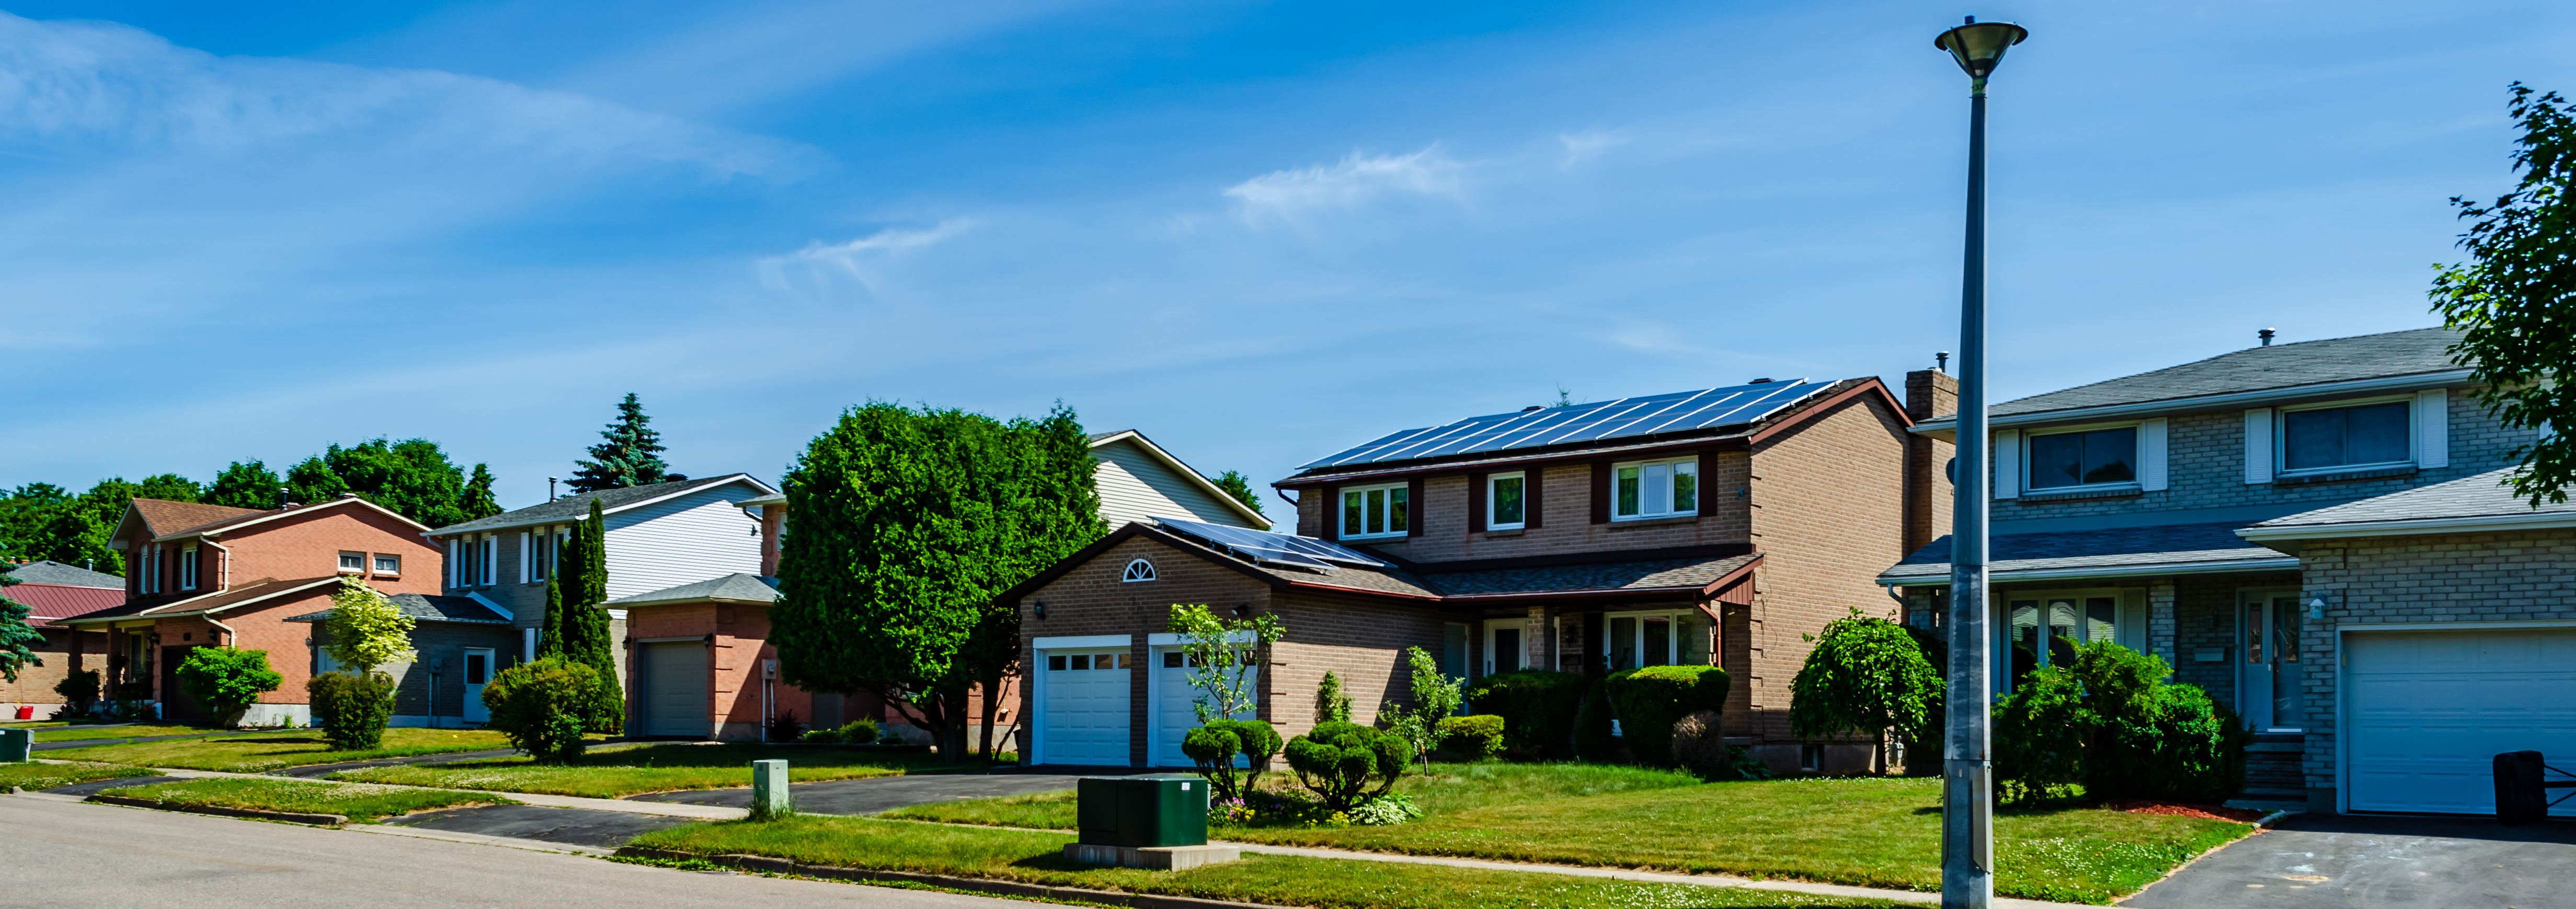 Panorama of a row of residential houses along a street, one with solar panels on the roof under a blue sky